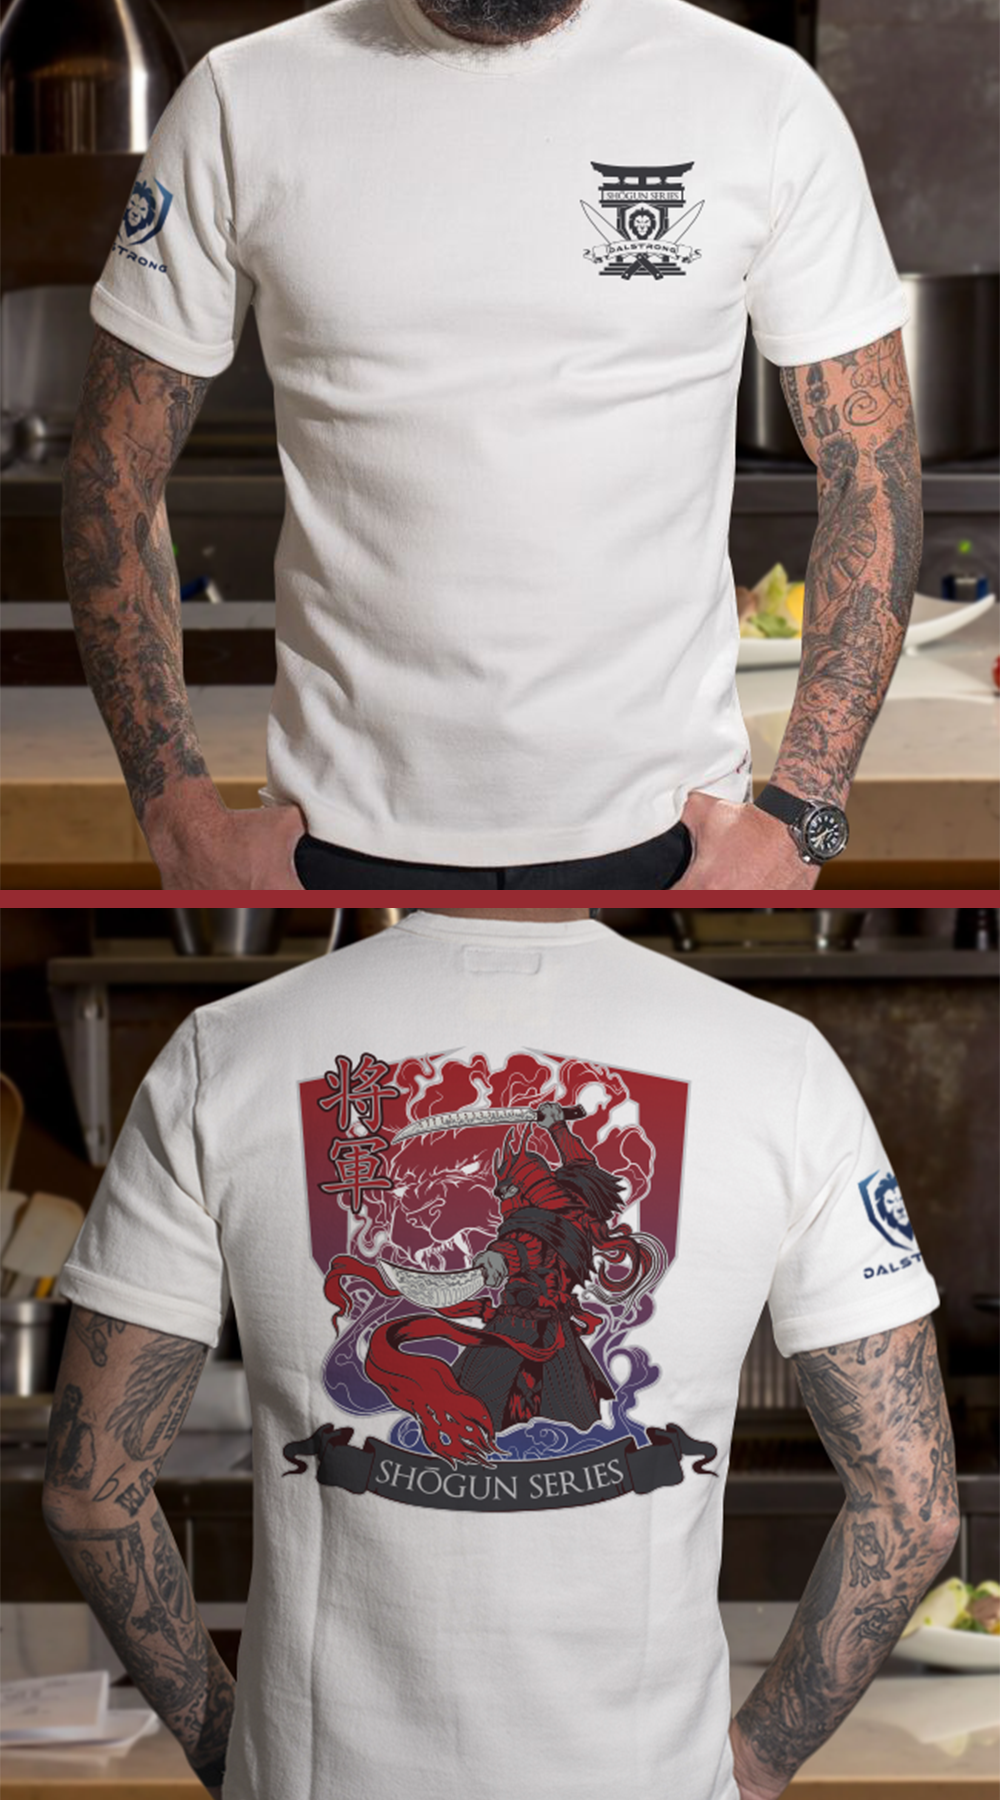 Dalstrong the shogun series blades up tee white front and back preview.